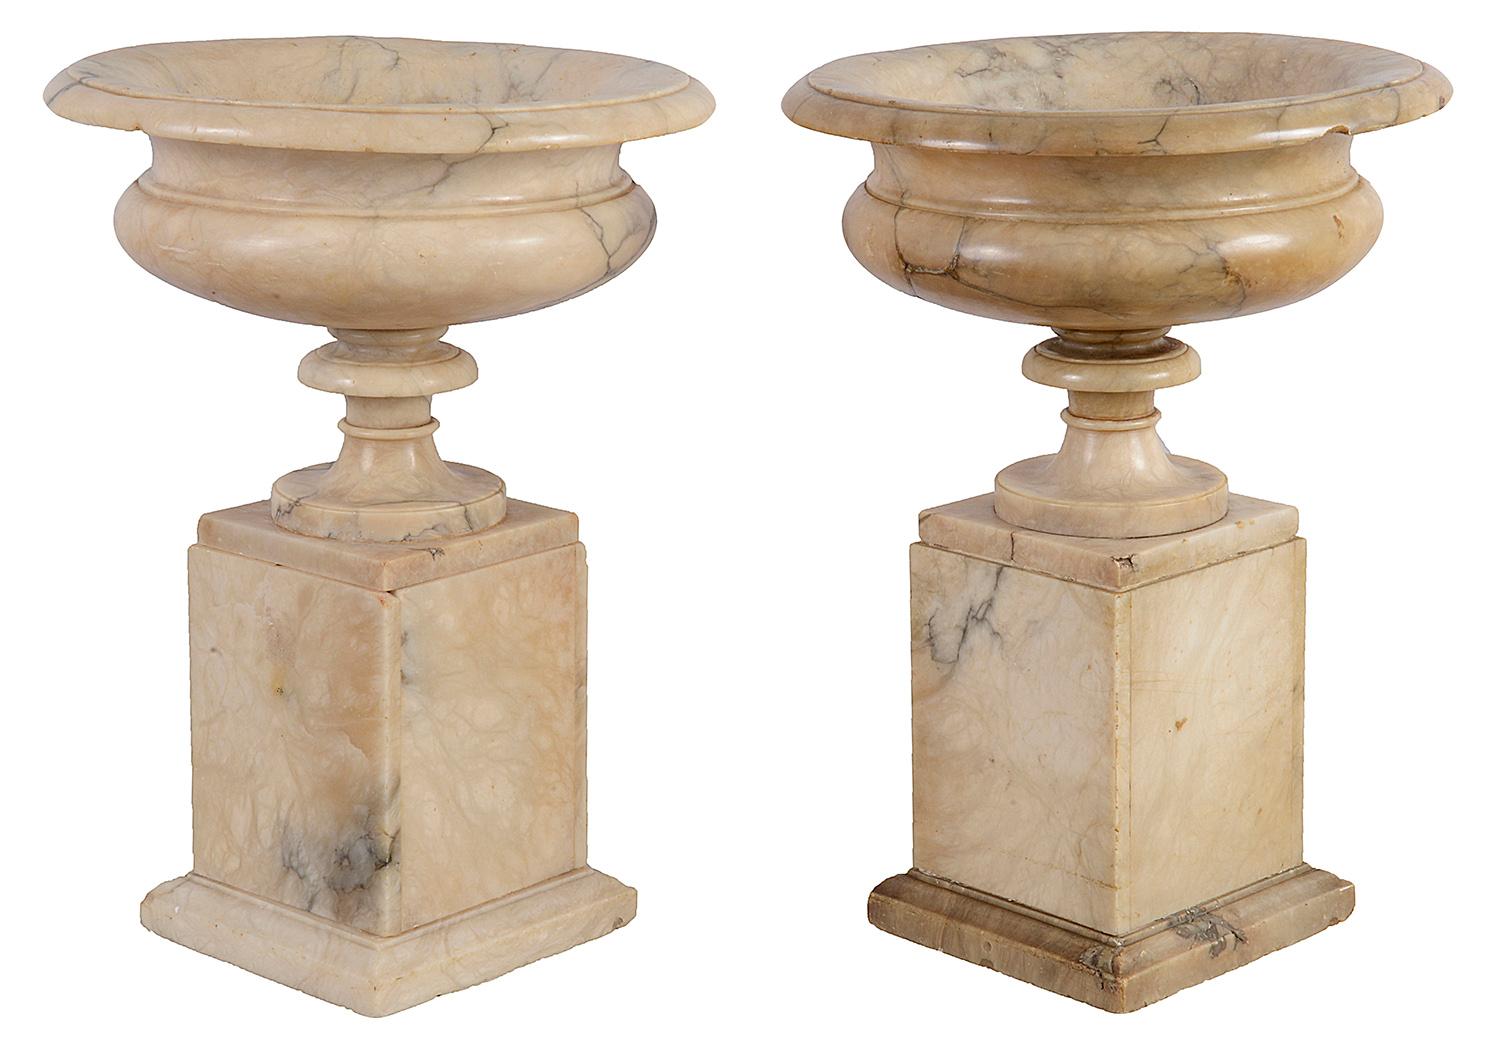 A very impressive pair of Italian 19th century carved Alabaster Grand Tour tazzas on pedestals. Measures: 43cm(17